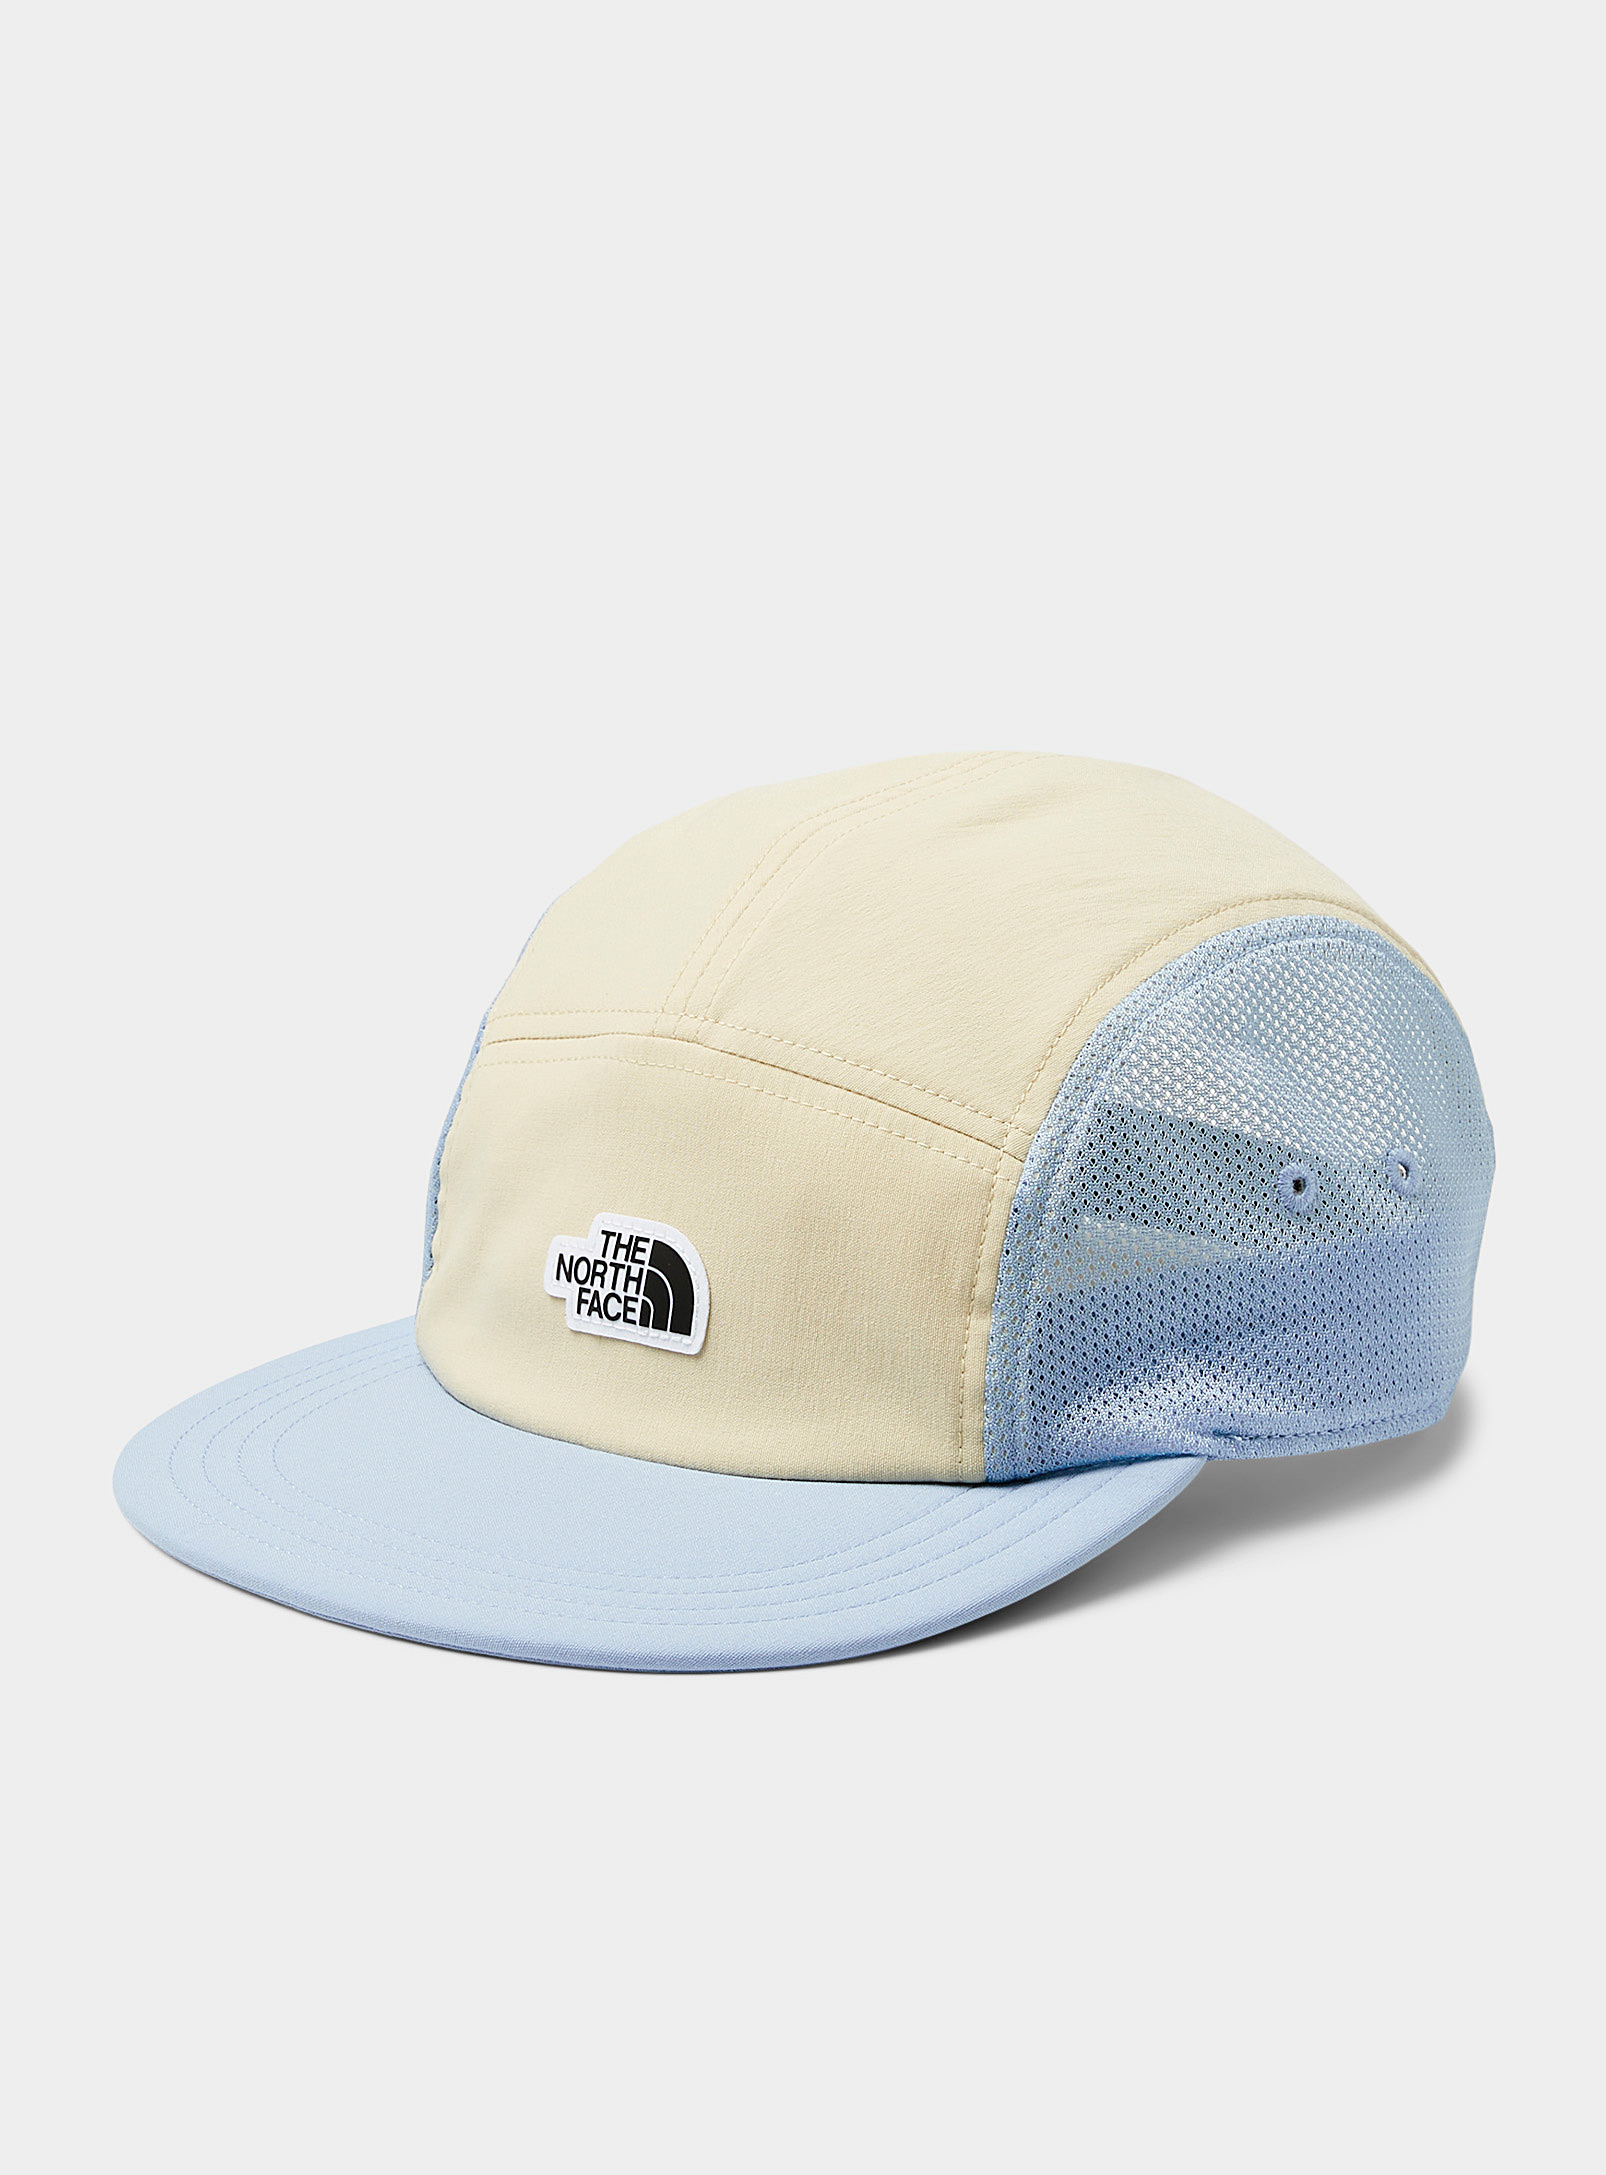 The North Face Class V 5-panel Mesh Cap In Blue